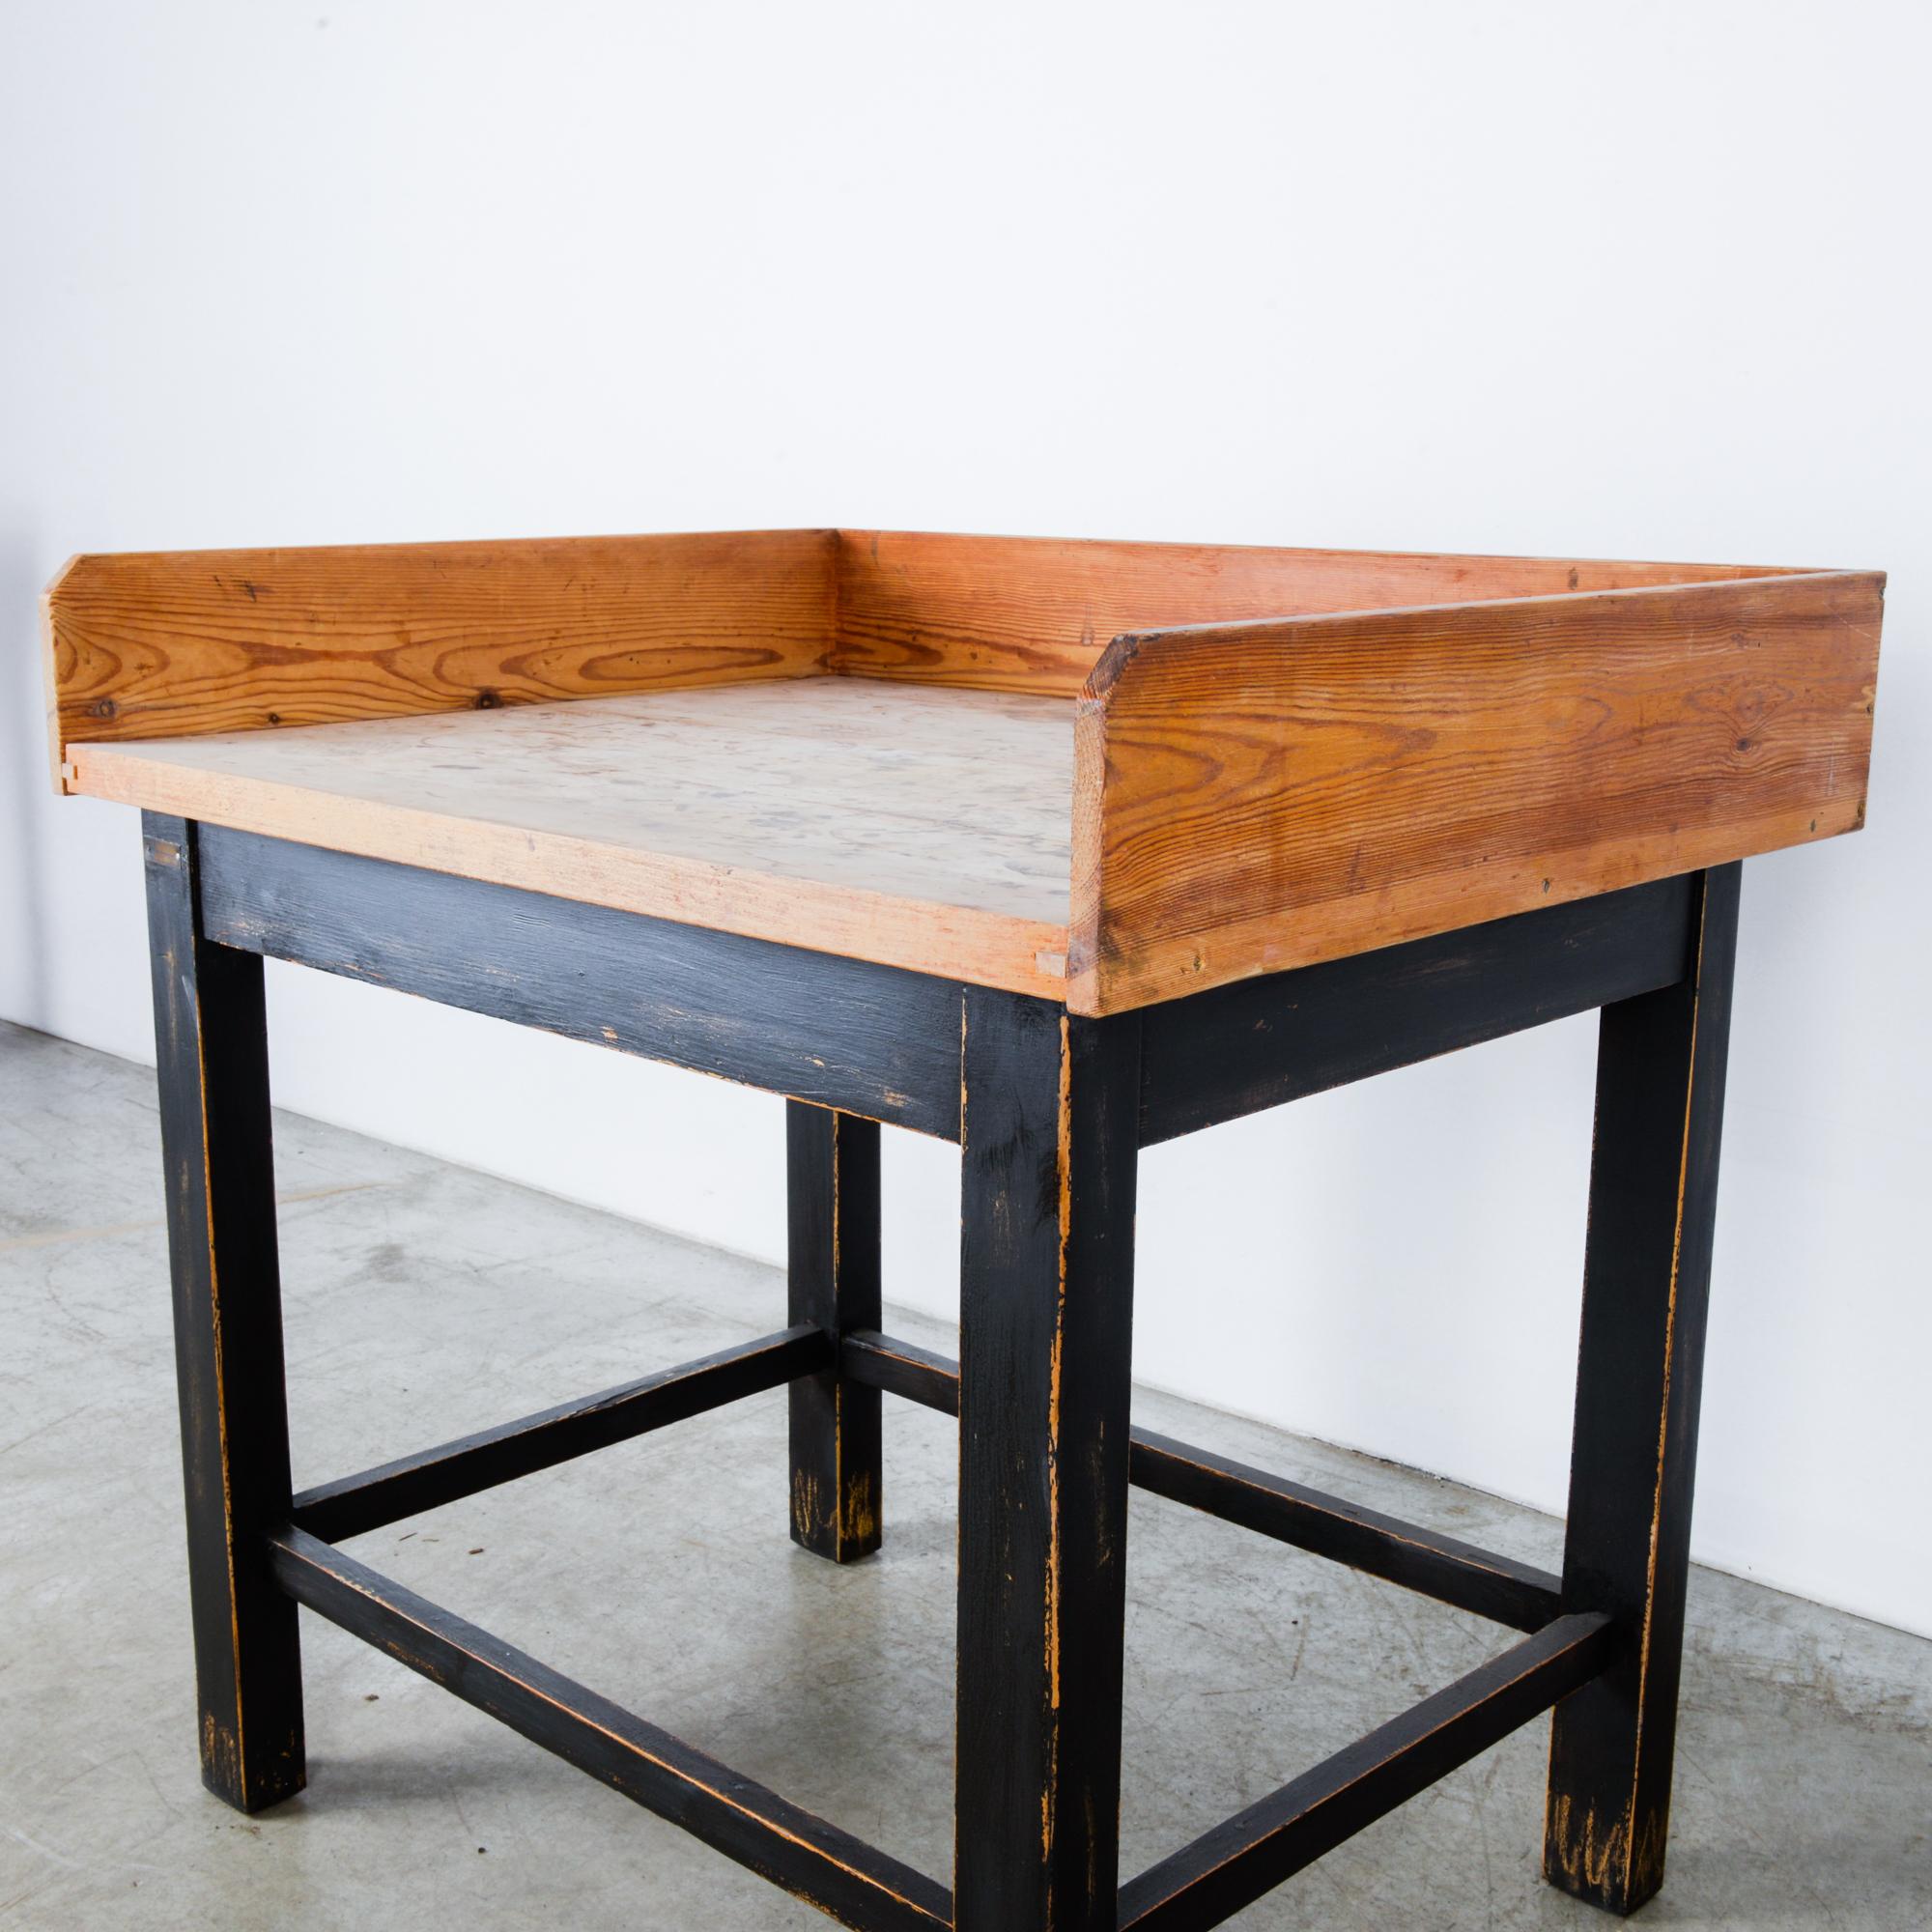 wooden bakery table